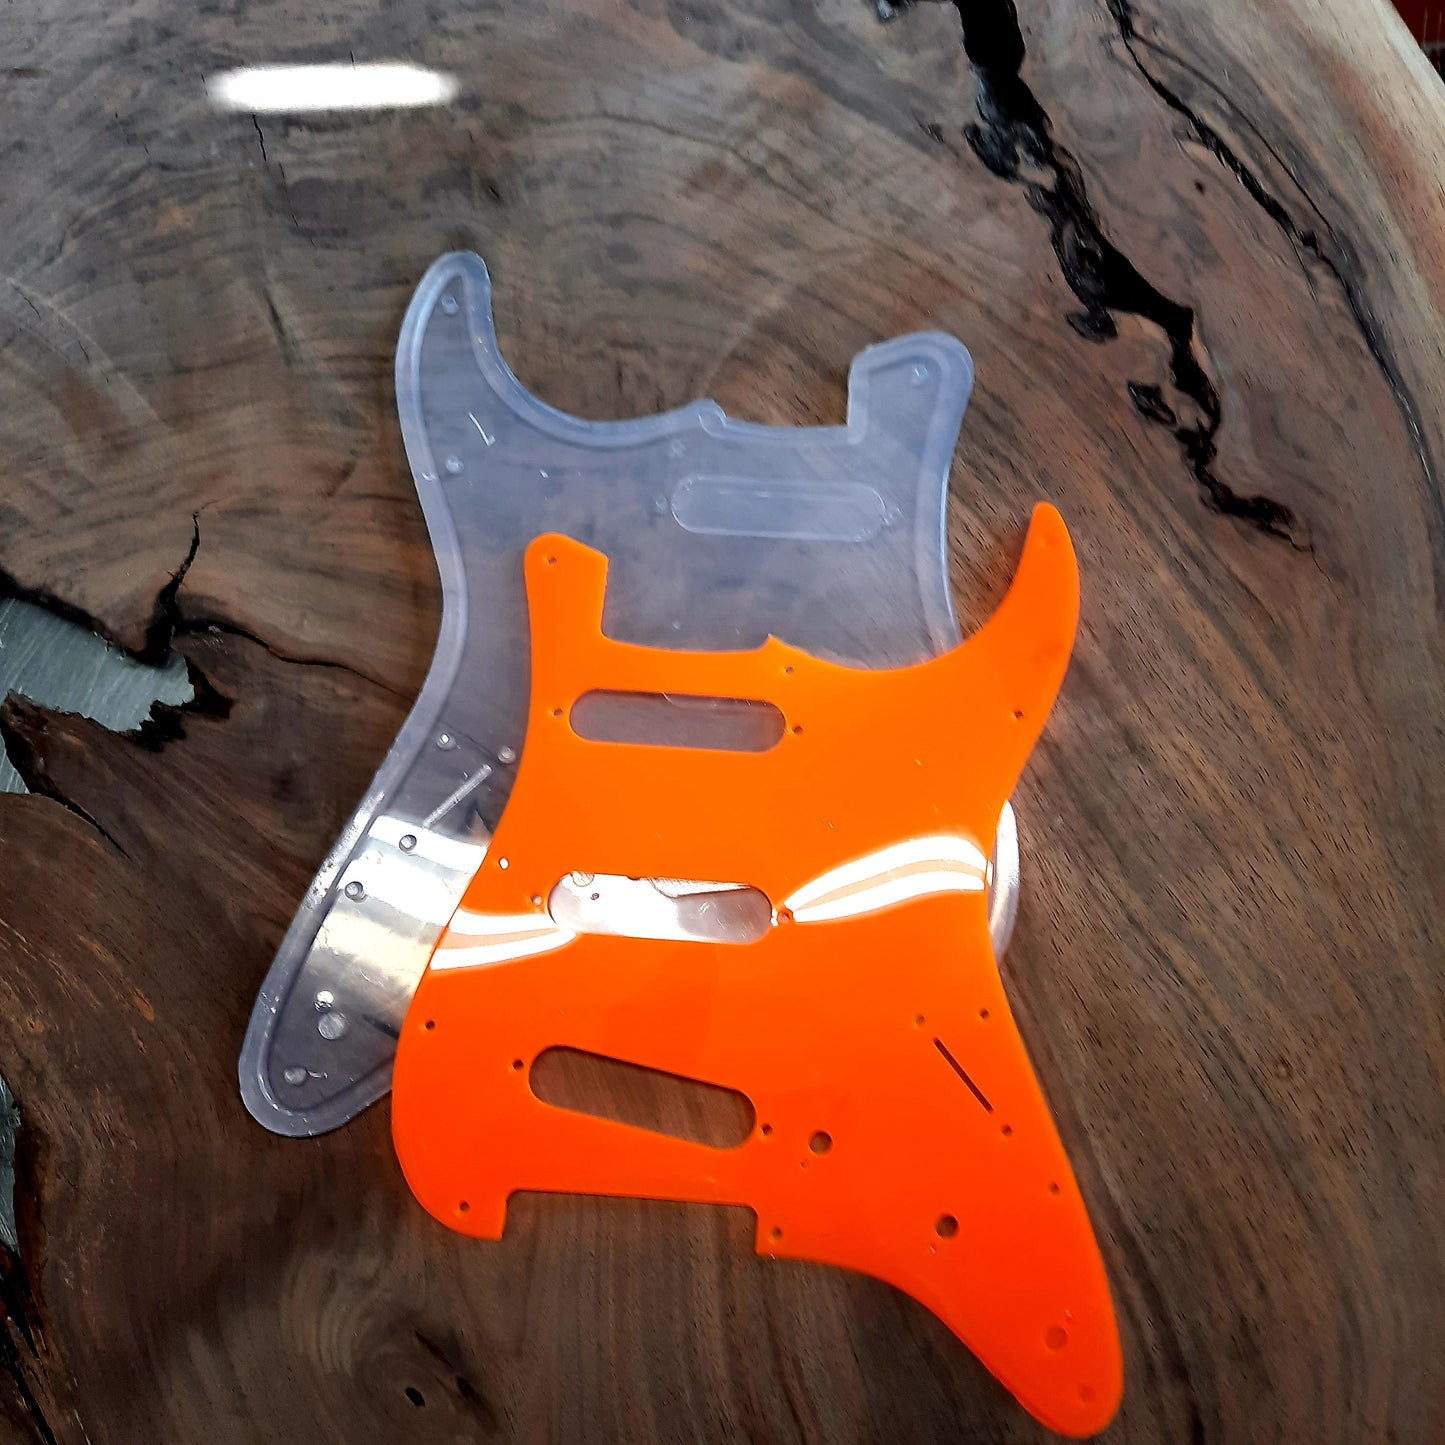 Fender Stratocaster Silicone Guitar MAKERS REUSABLE MOLD™ Shipping